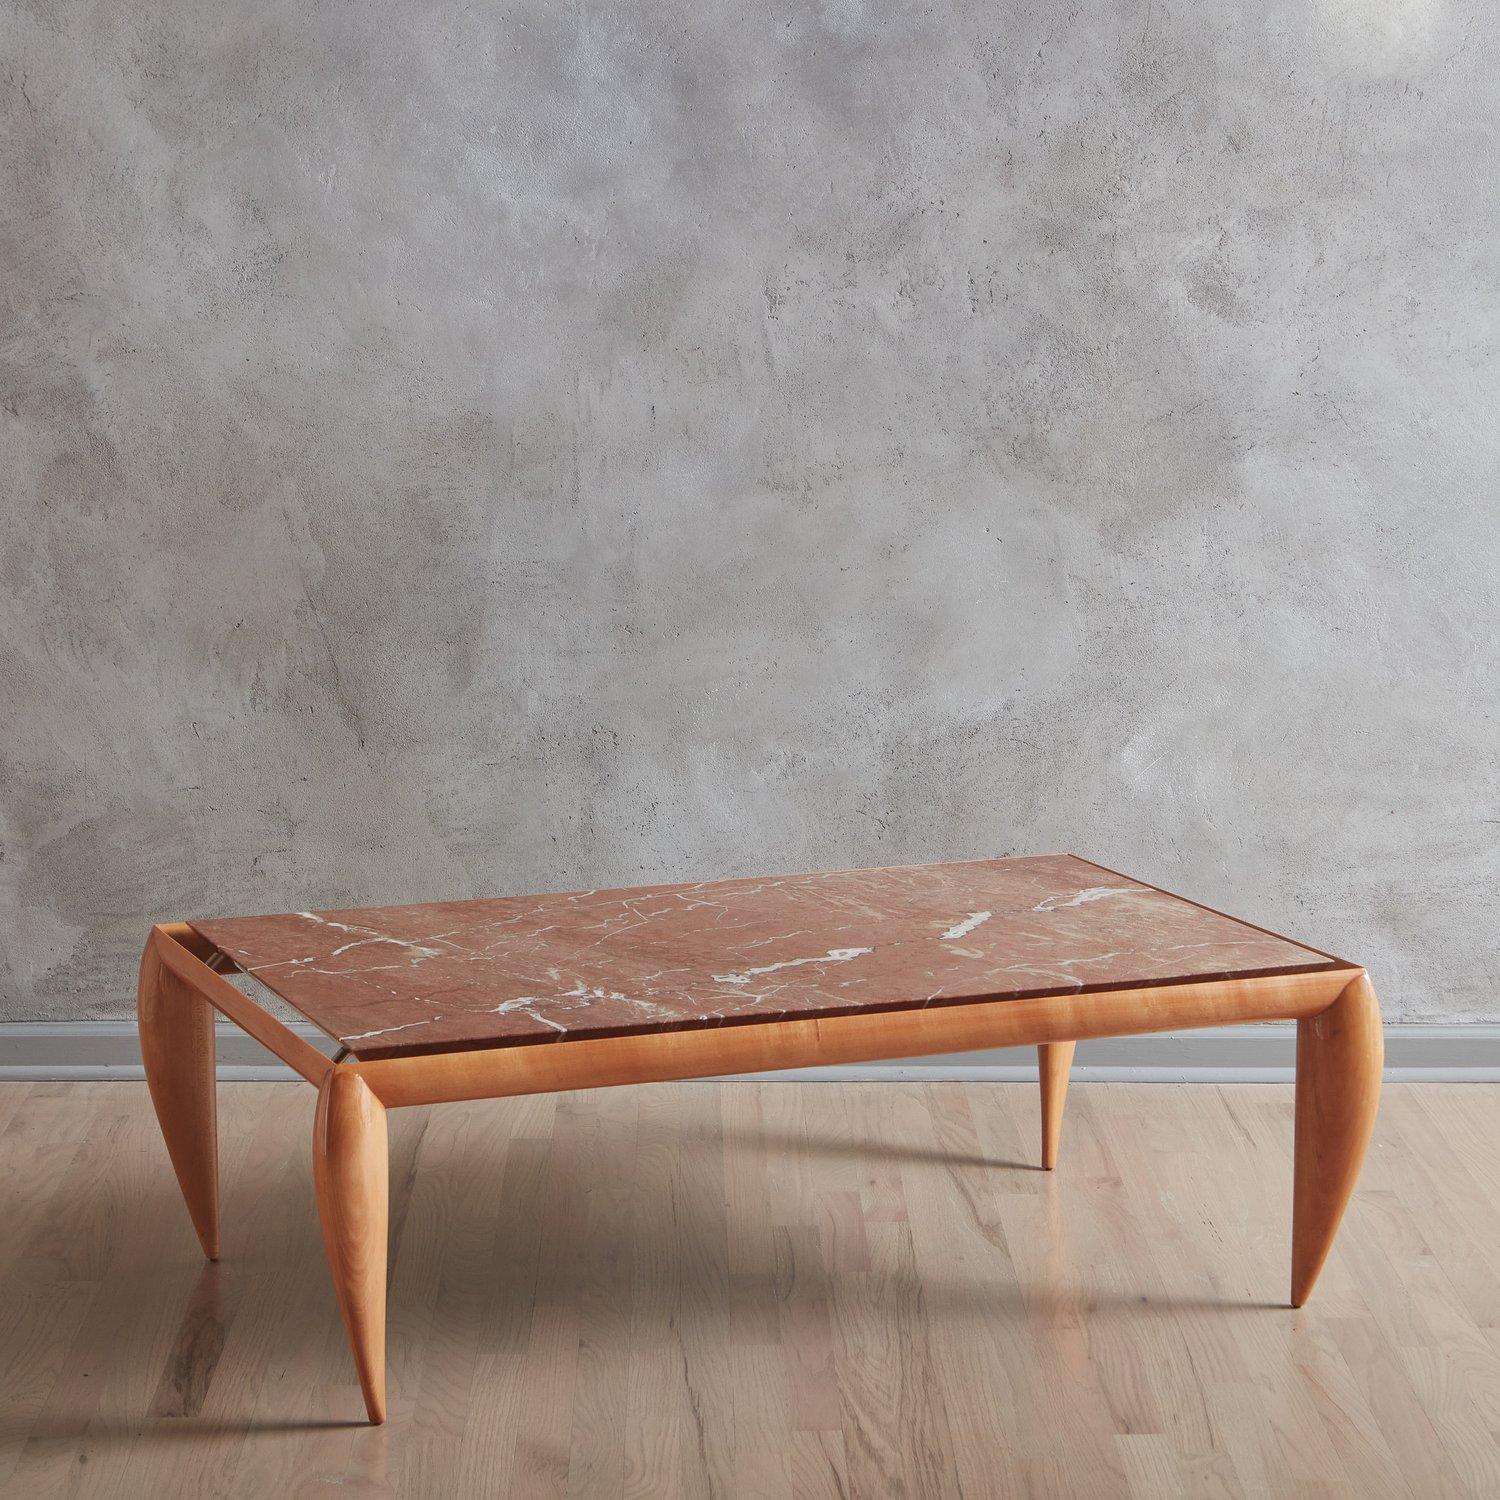 A postmodern coffee table featuring a lacquered wooden base with striking tapered, curved legs. This piece has a rectangular Rosso Alicante marble tabletop with gorgeous veining in coral, cream and red hues. The top sits on metal hardware, making it